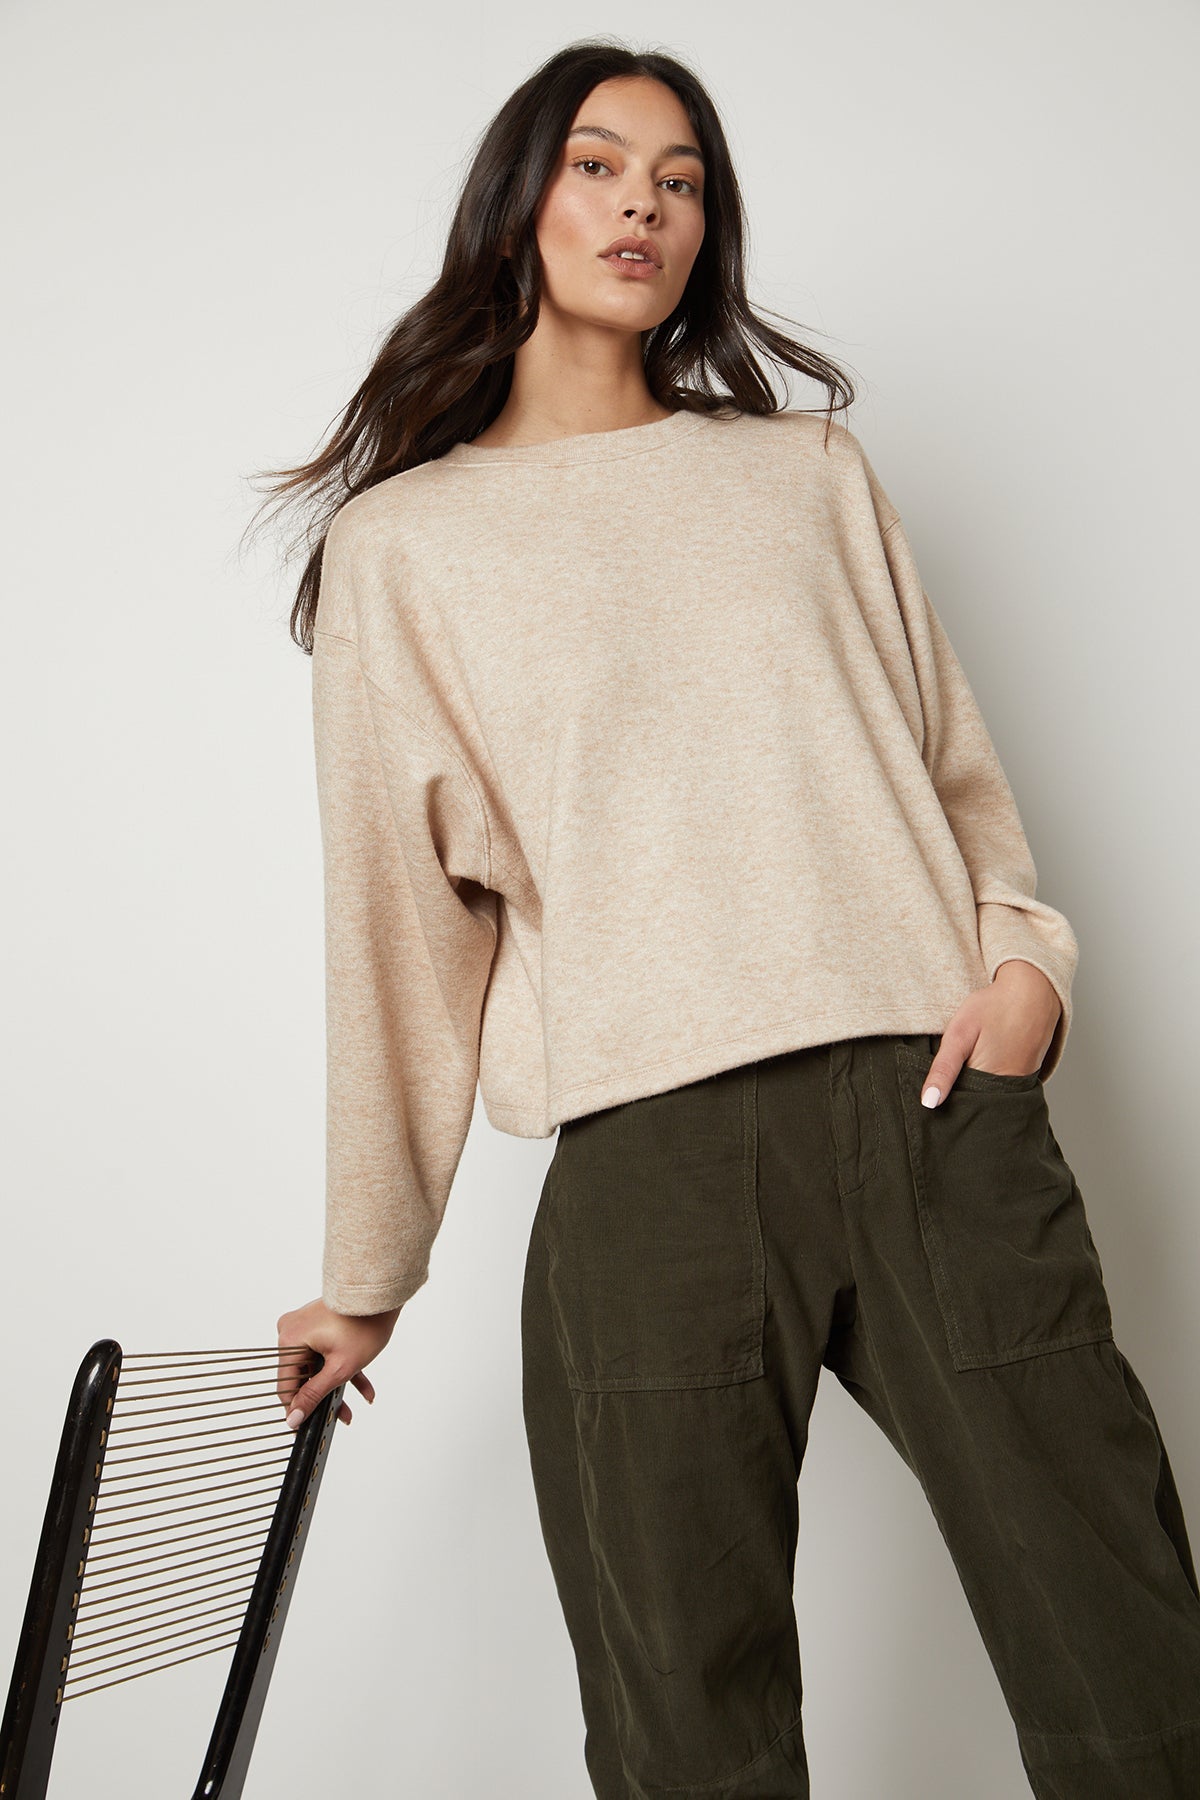   The model is wearing an oversized NIA DOUBLE KNIT CROPPED CREW sweater by Velvet by Graham & Spencer and olive trousers, combining comfort and style. 